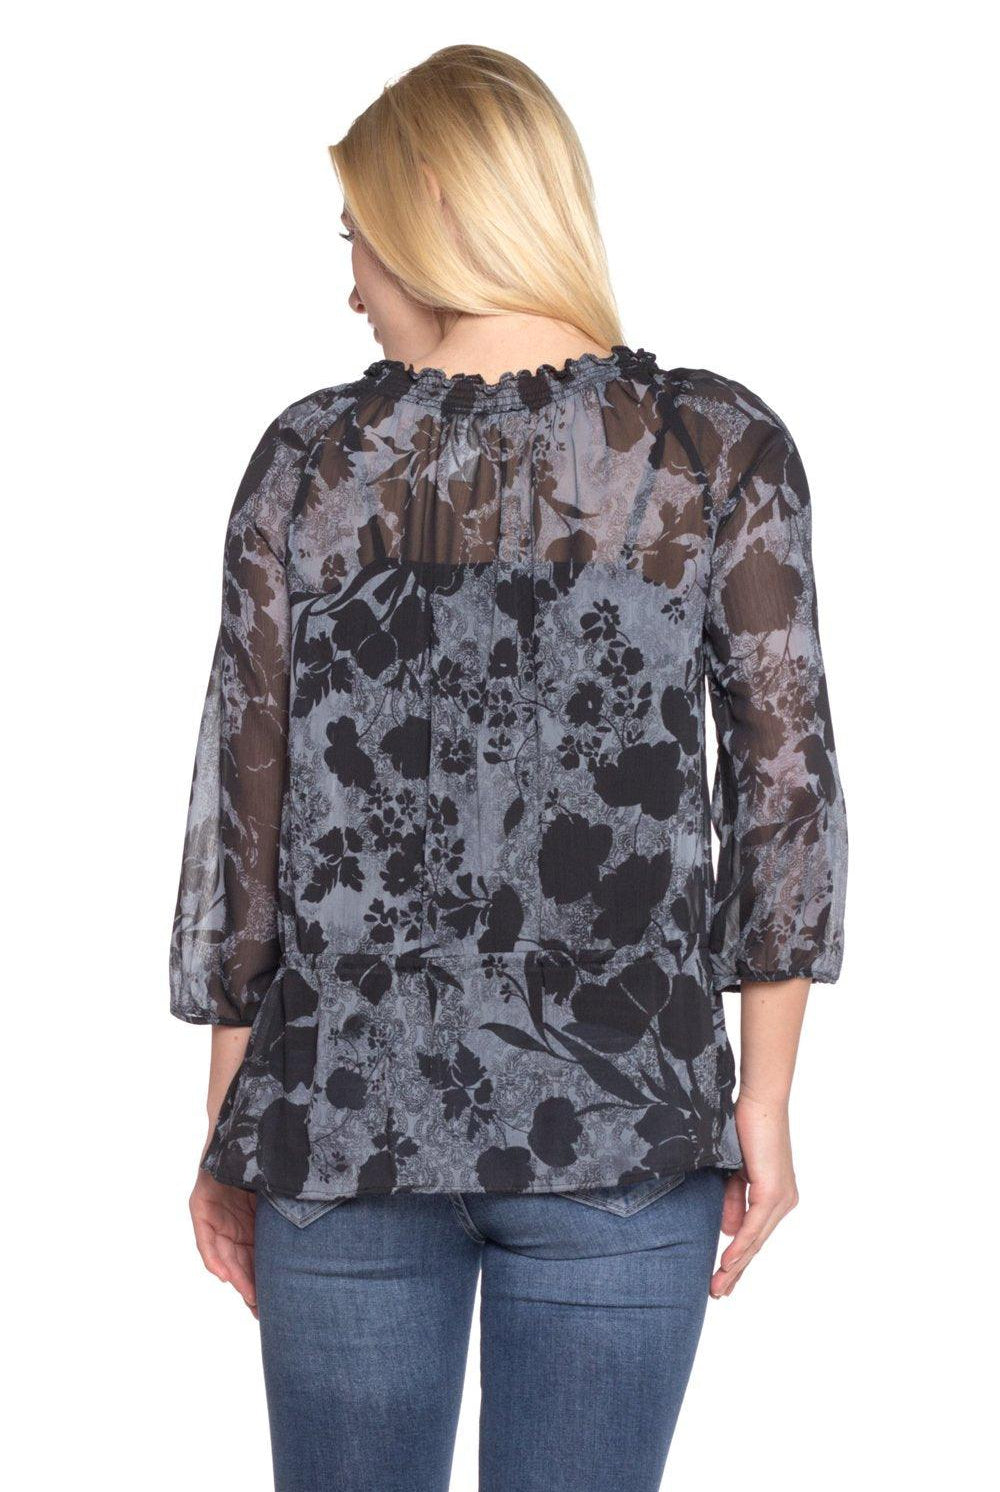 Women's Shirts Women's Floral Printed Chiffon Button Front Top with Tank Lining